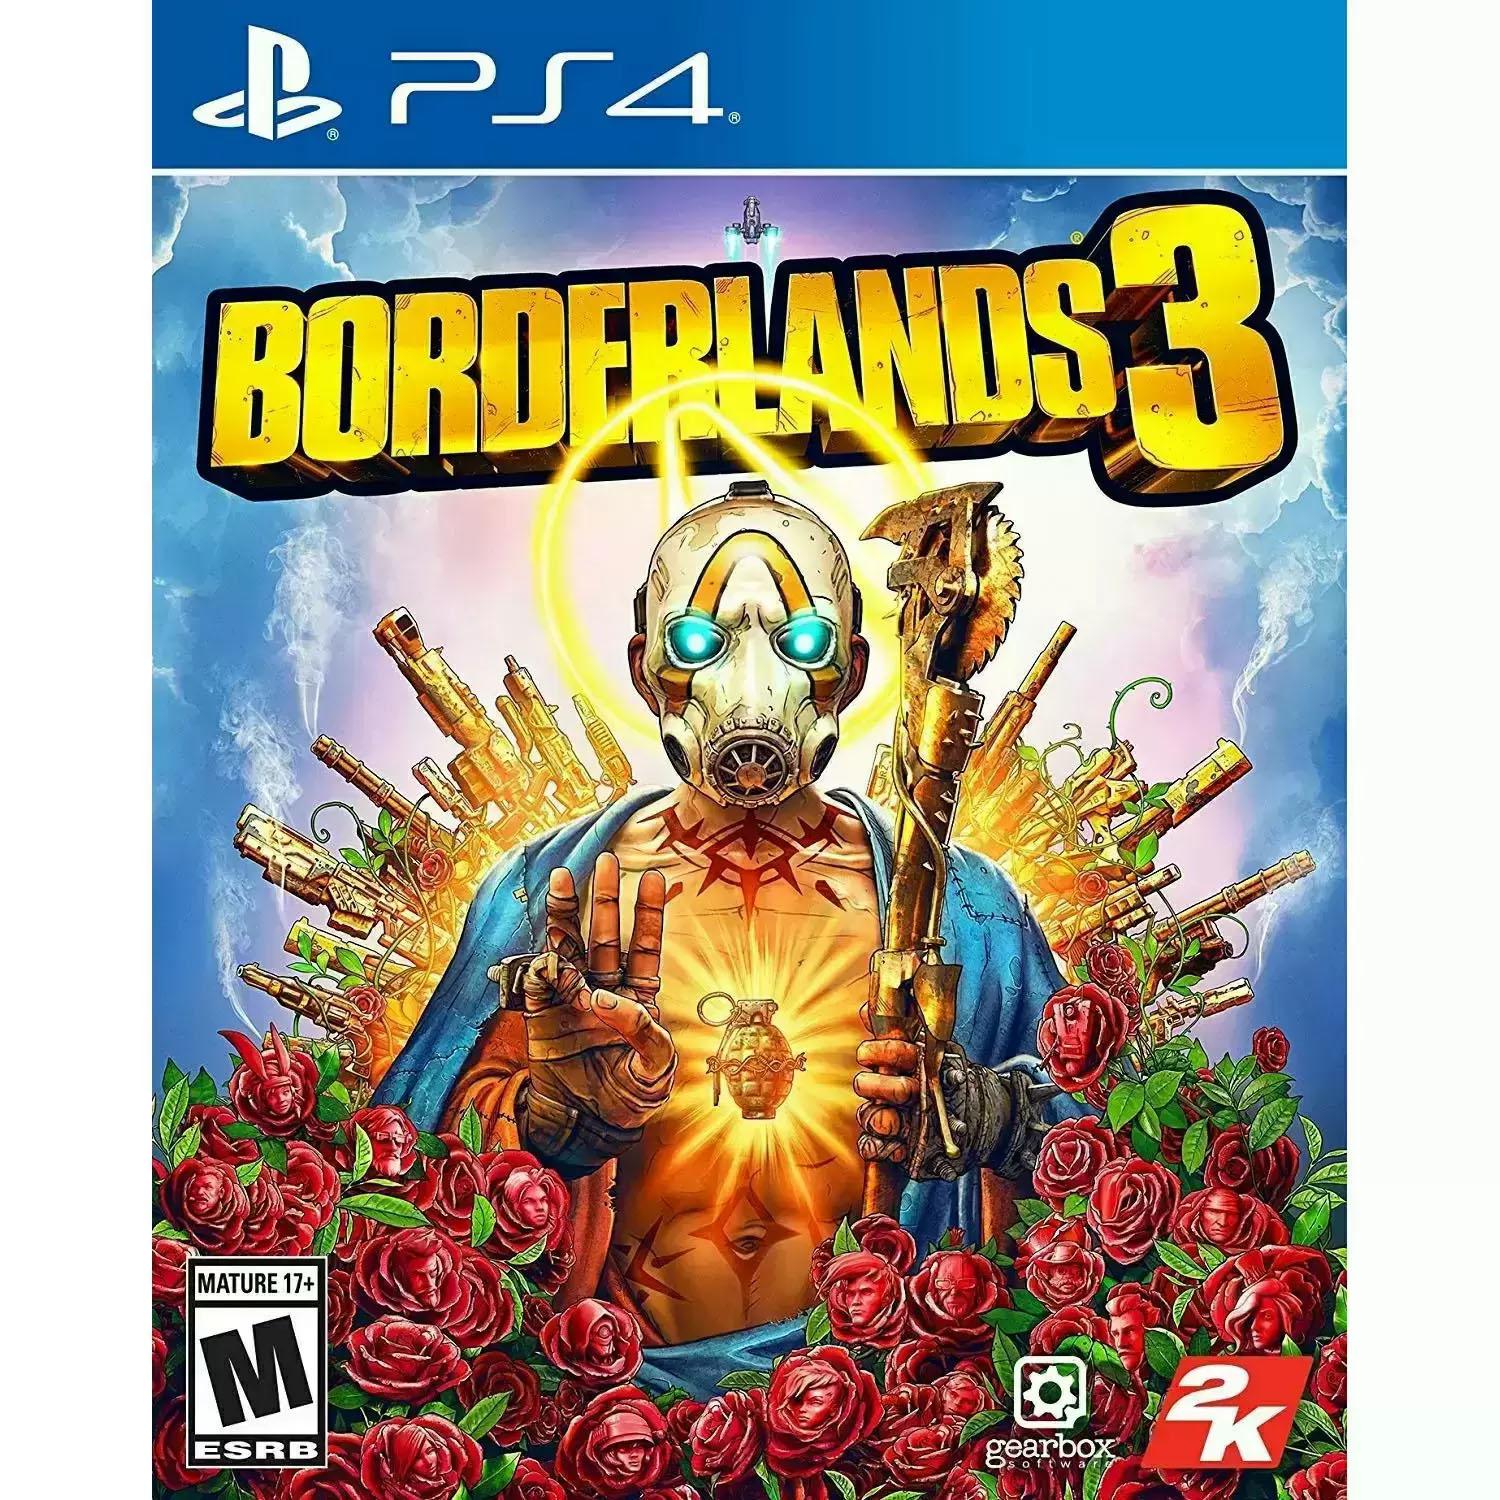 Borderlands 3 Xbox One or PS4 for $9.99